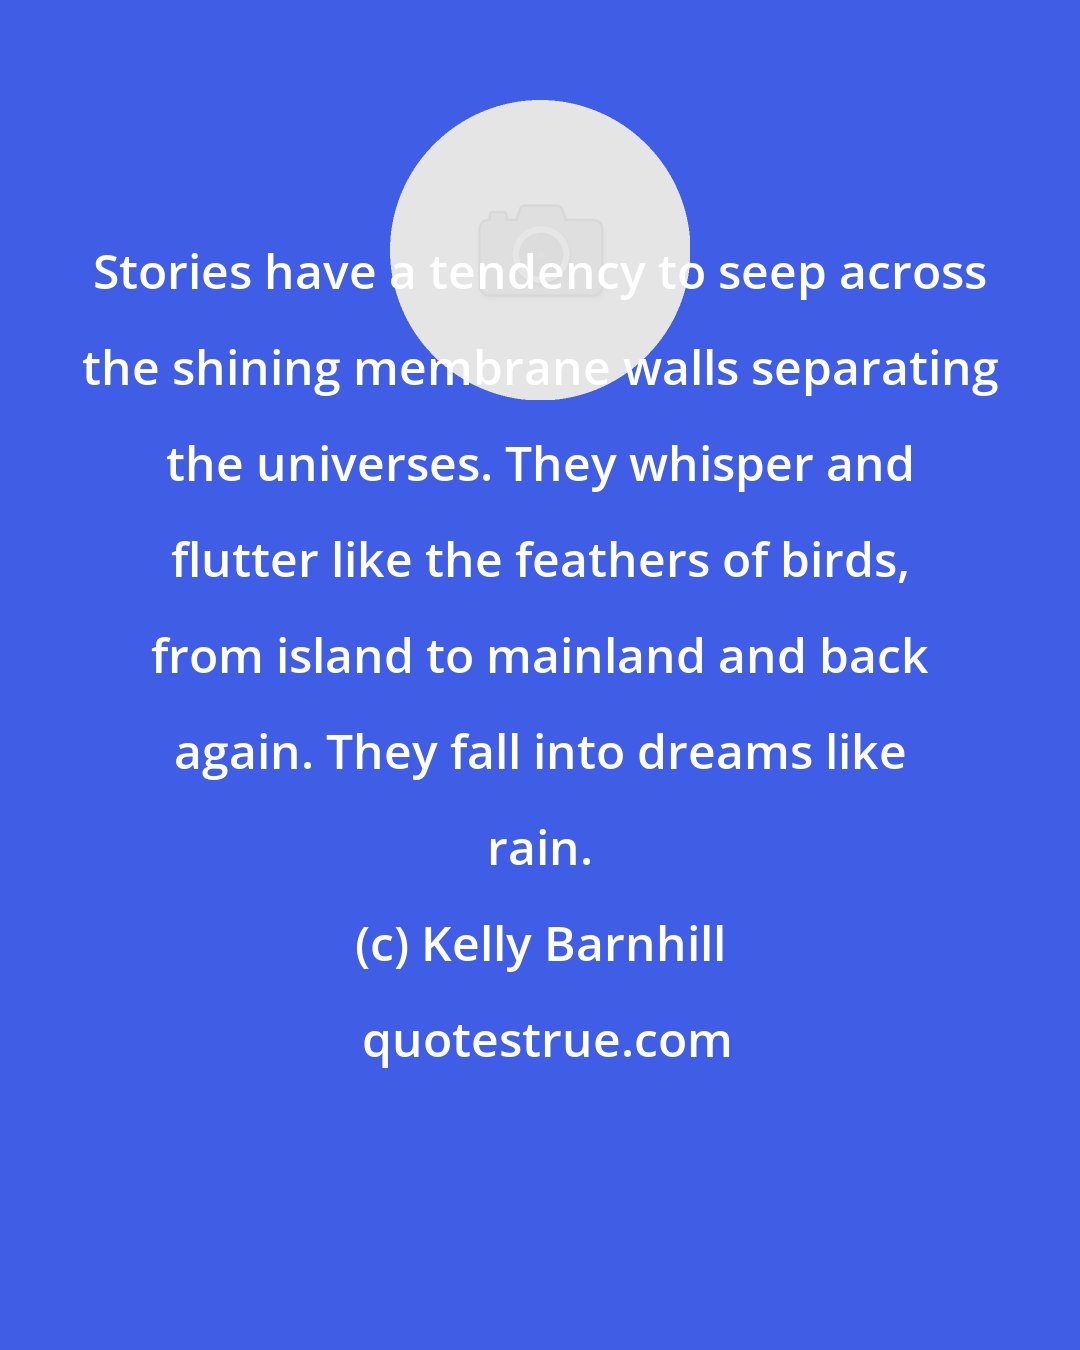 Kelly Barnhill: Stories have a tendency to seep across the shining membrane walls separating the universes. They whisper and flutter like the feathers of birds, from island to mainland and back again. They fall into dreams like rain.